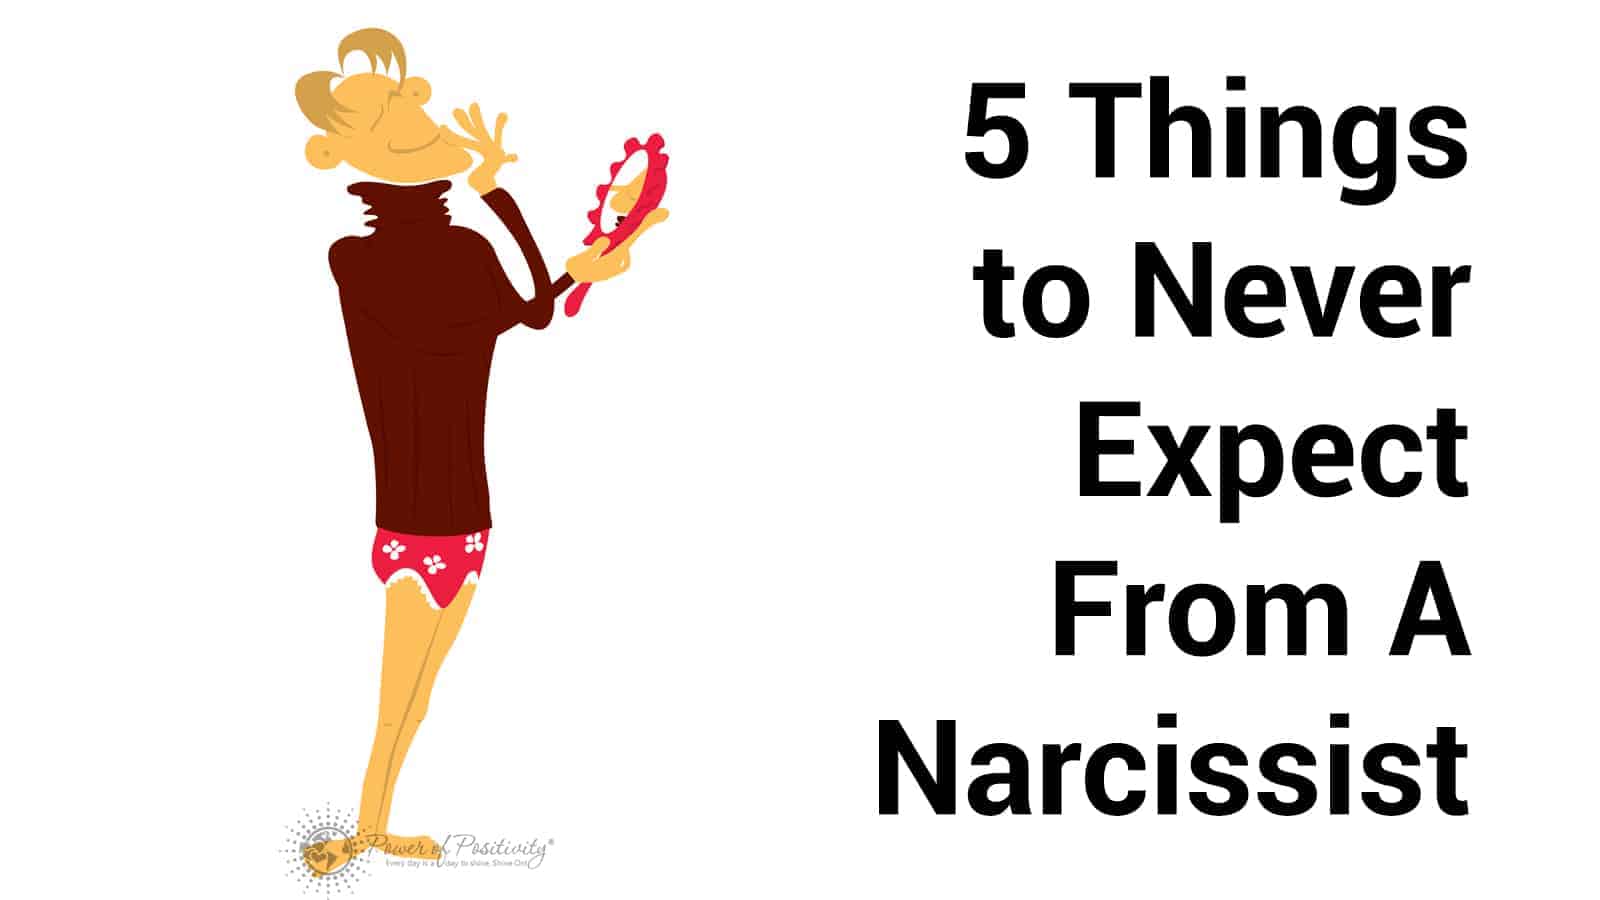 5 Things To Never Expect From A Narcissist.